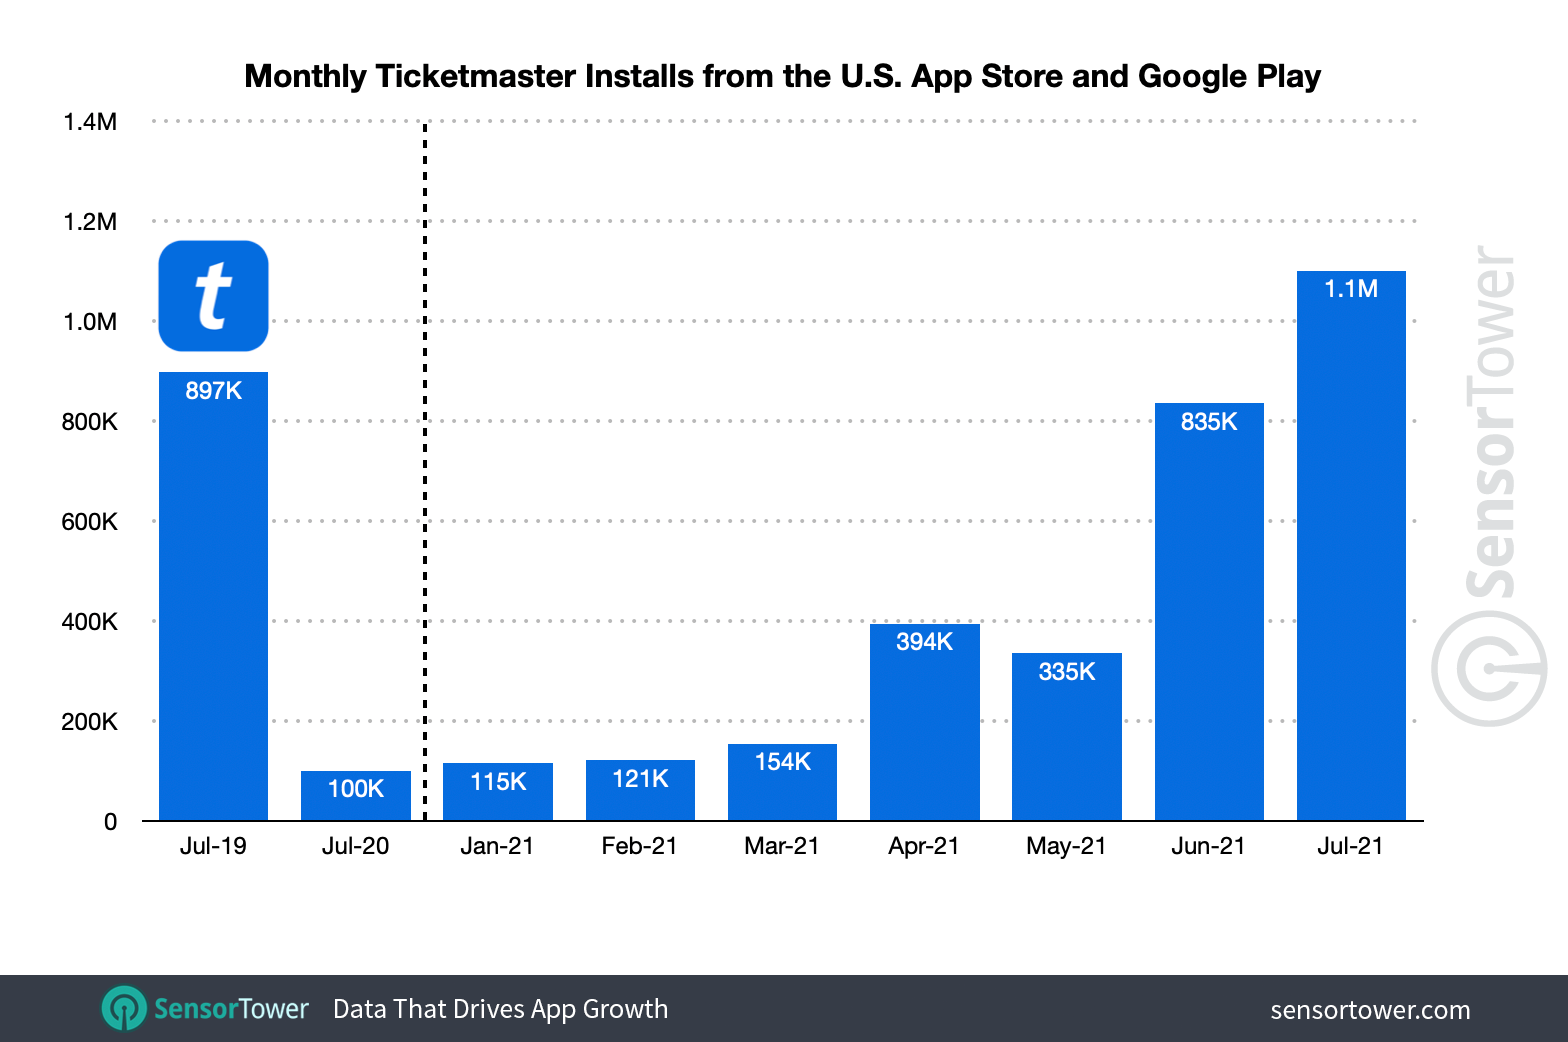 Ticketmaster monthly installs shows 18 percent growth compared to July 2019